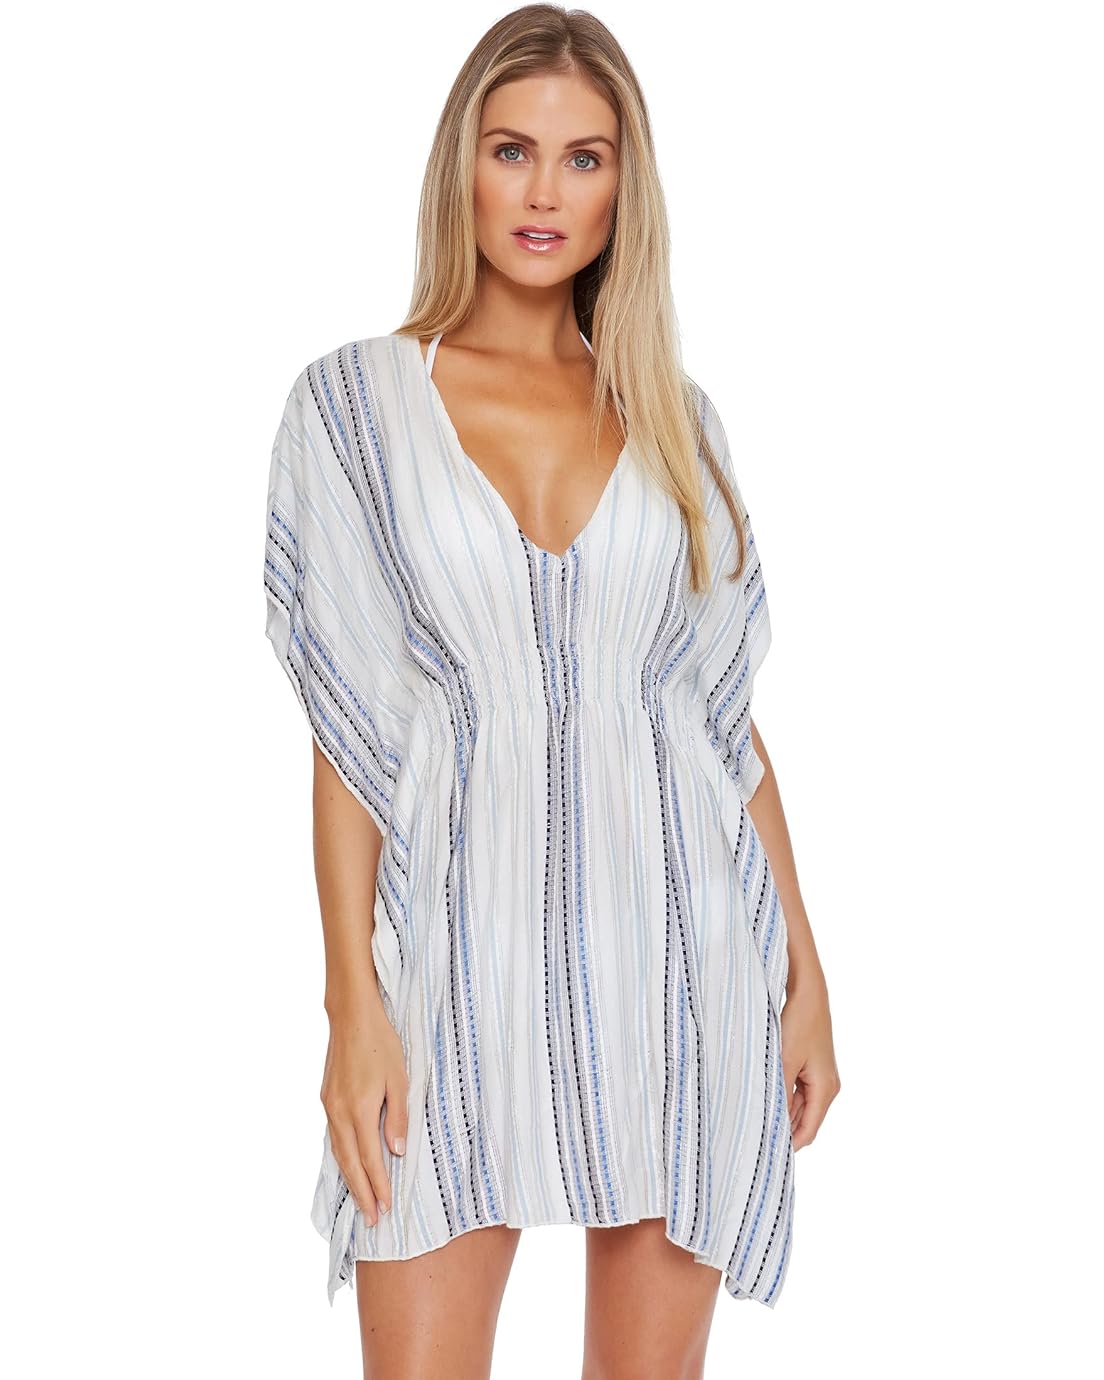 BECCA by Rebecca Virtue Radiance Woven Tunic Cover-Up